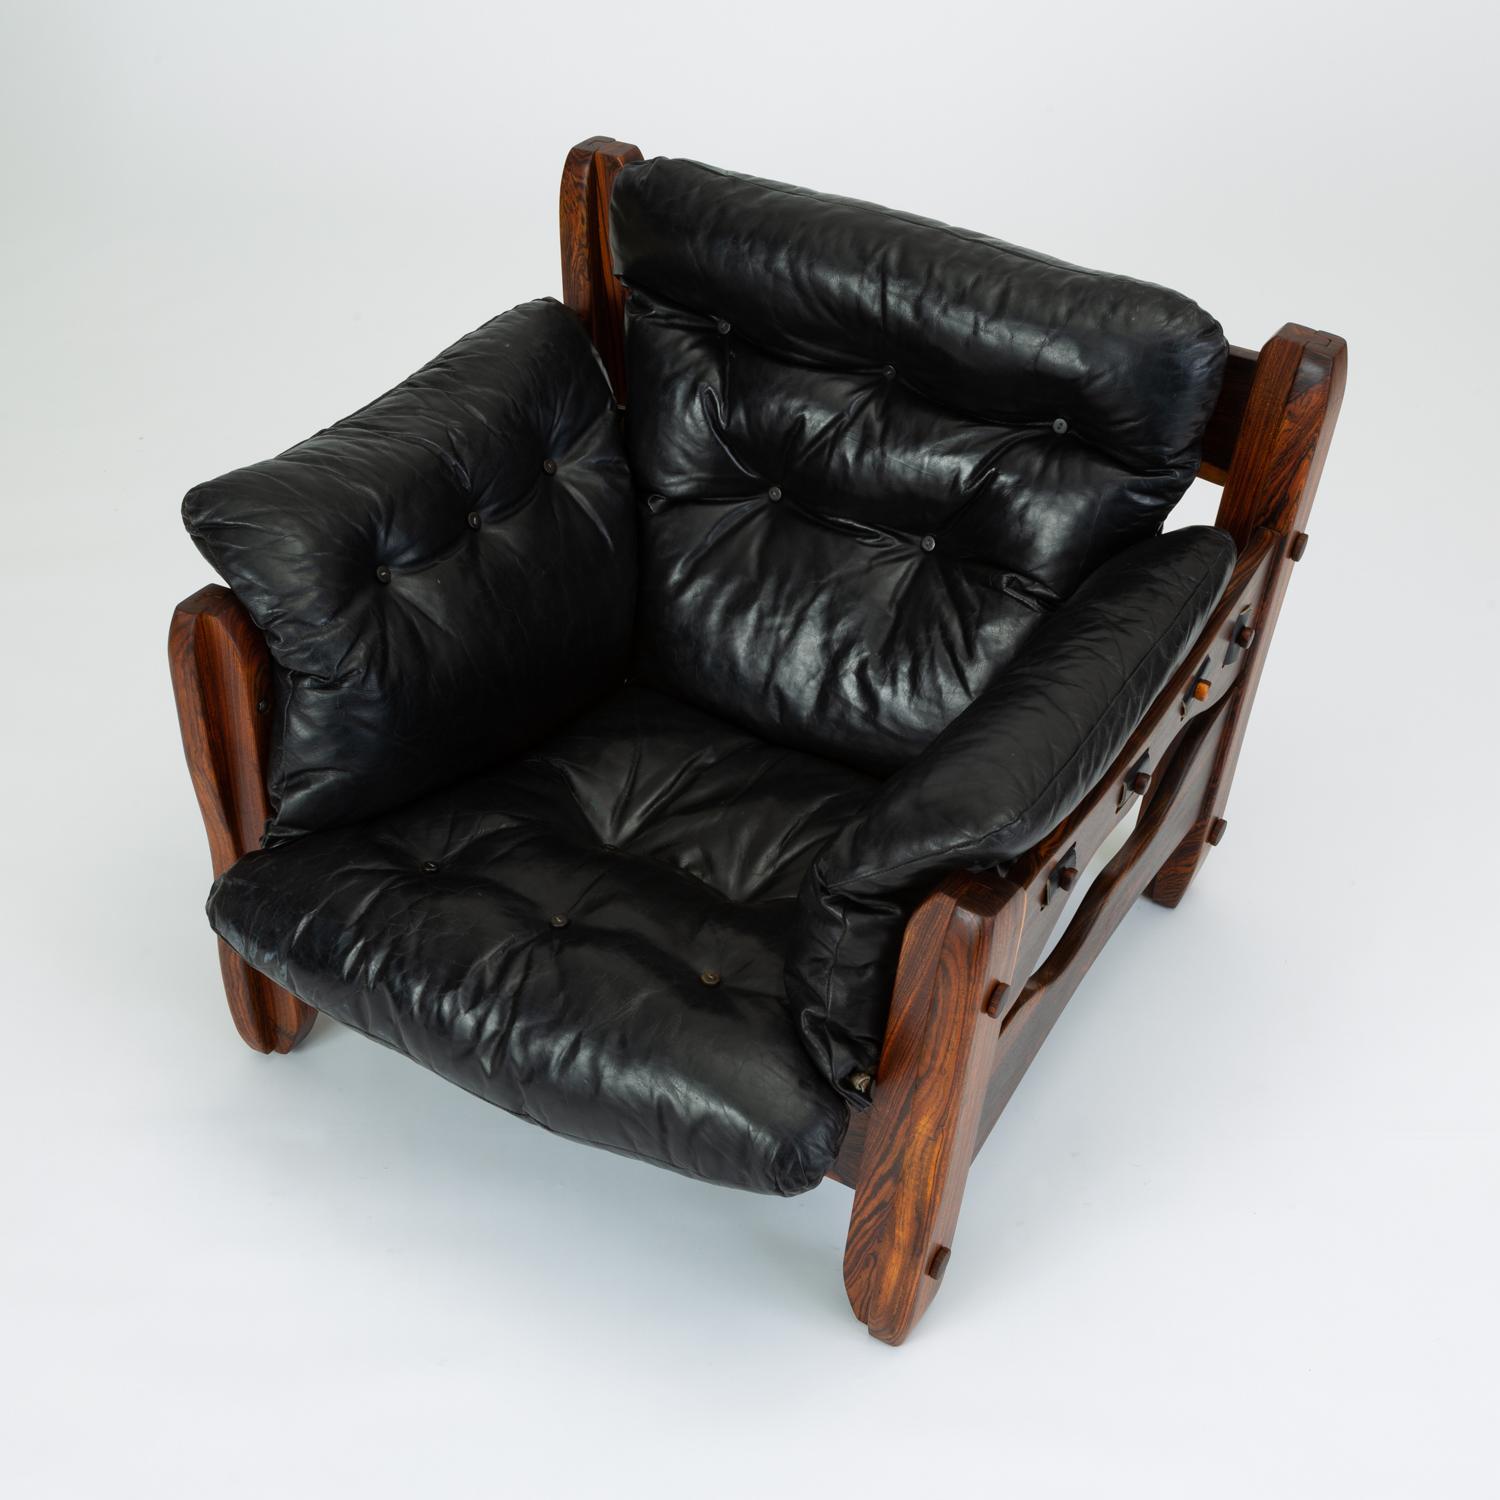 Mexican Descanso Lounge Chair by Don Shoemaker for Señal in Cueramo and Leather